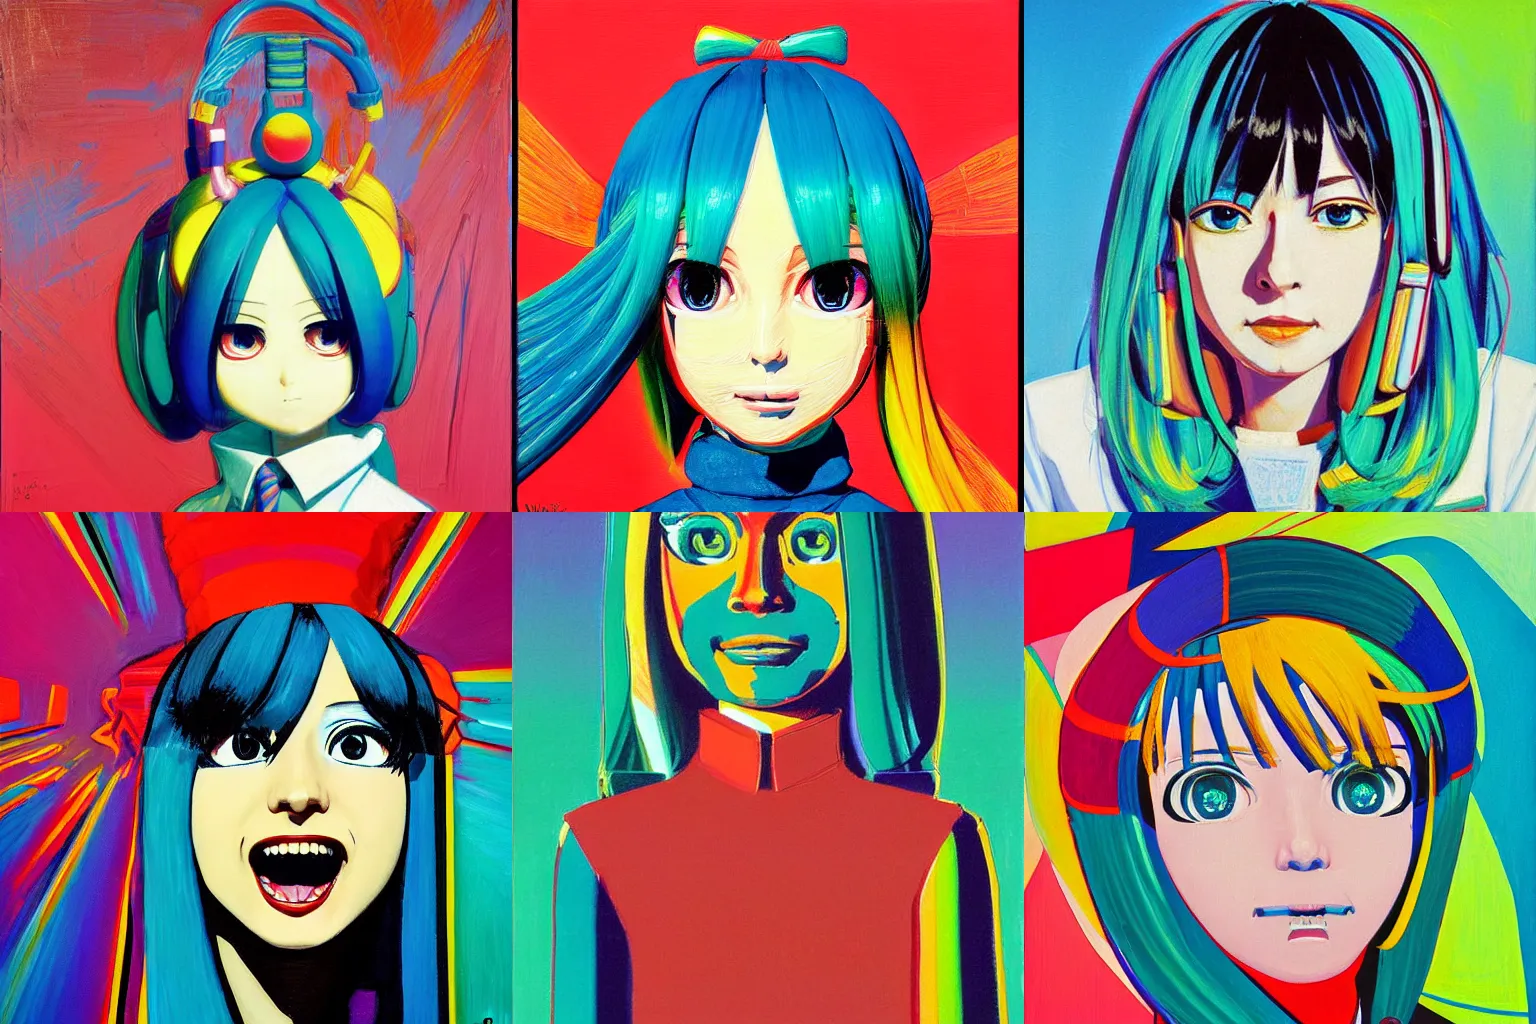 Prompt: a portrait of a serious Operator Hatsune miku by Wayne Thiebaud, painting by Wayne Thiebaud, heavy pigment, colourful, heavy impasto technique, anime style, big eyes, space age pop, Operator mic